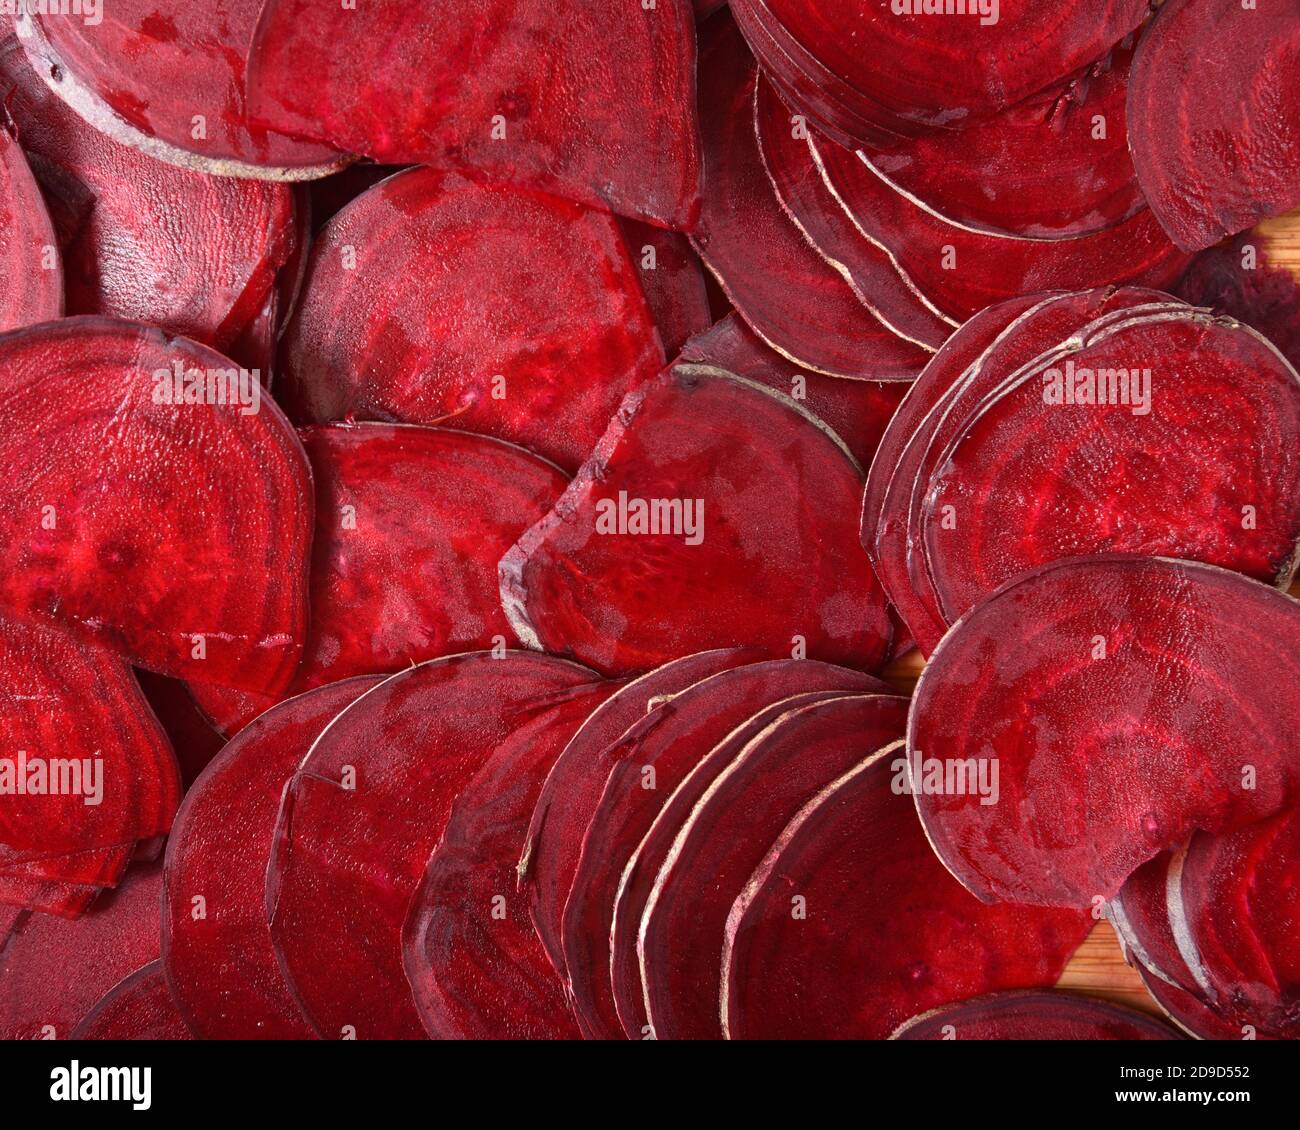 Background of thin sliced juicy red beets Stock Photo